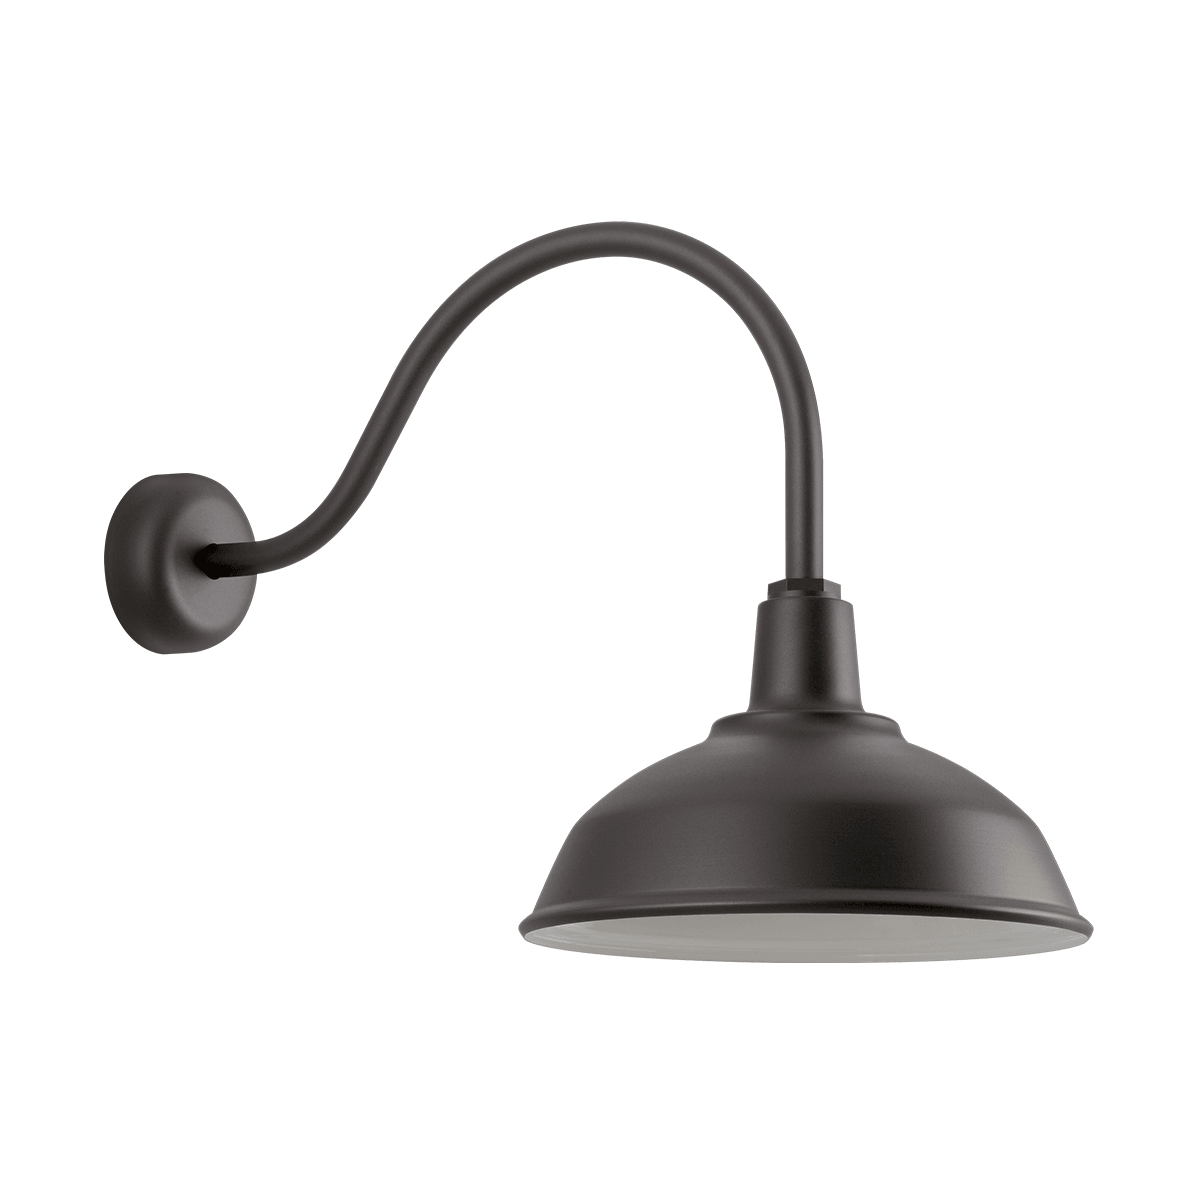 Steel with Arch Arm Outdoor Wall Sconce - LV LIGHTING